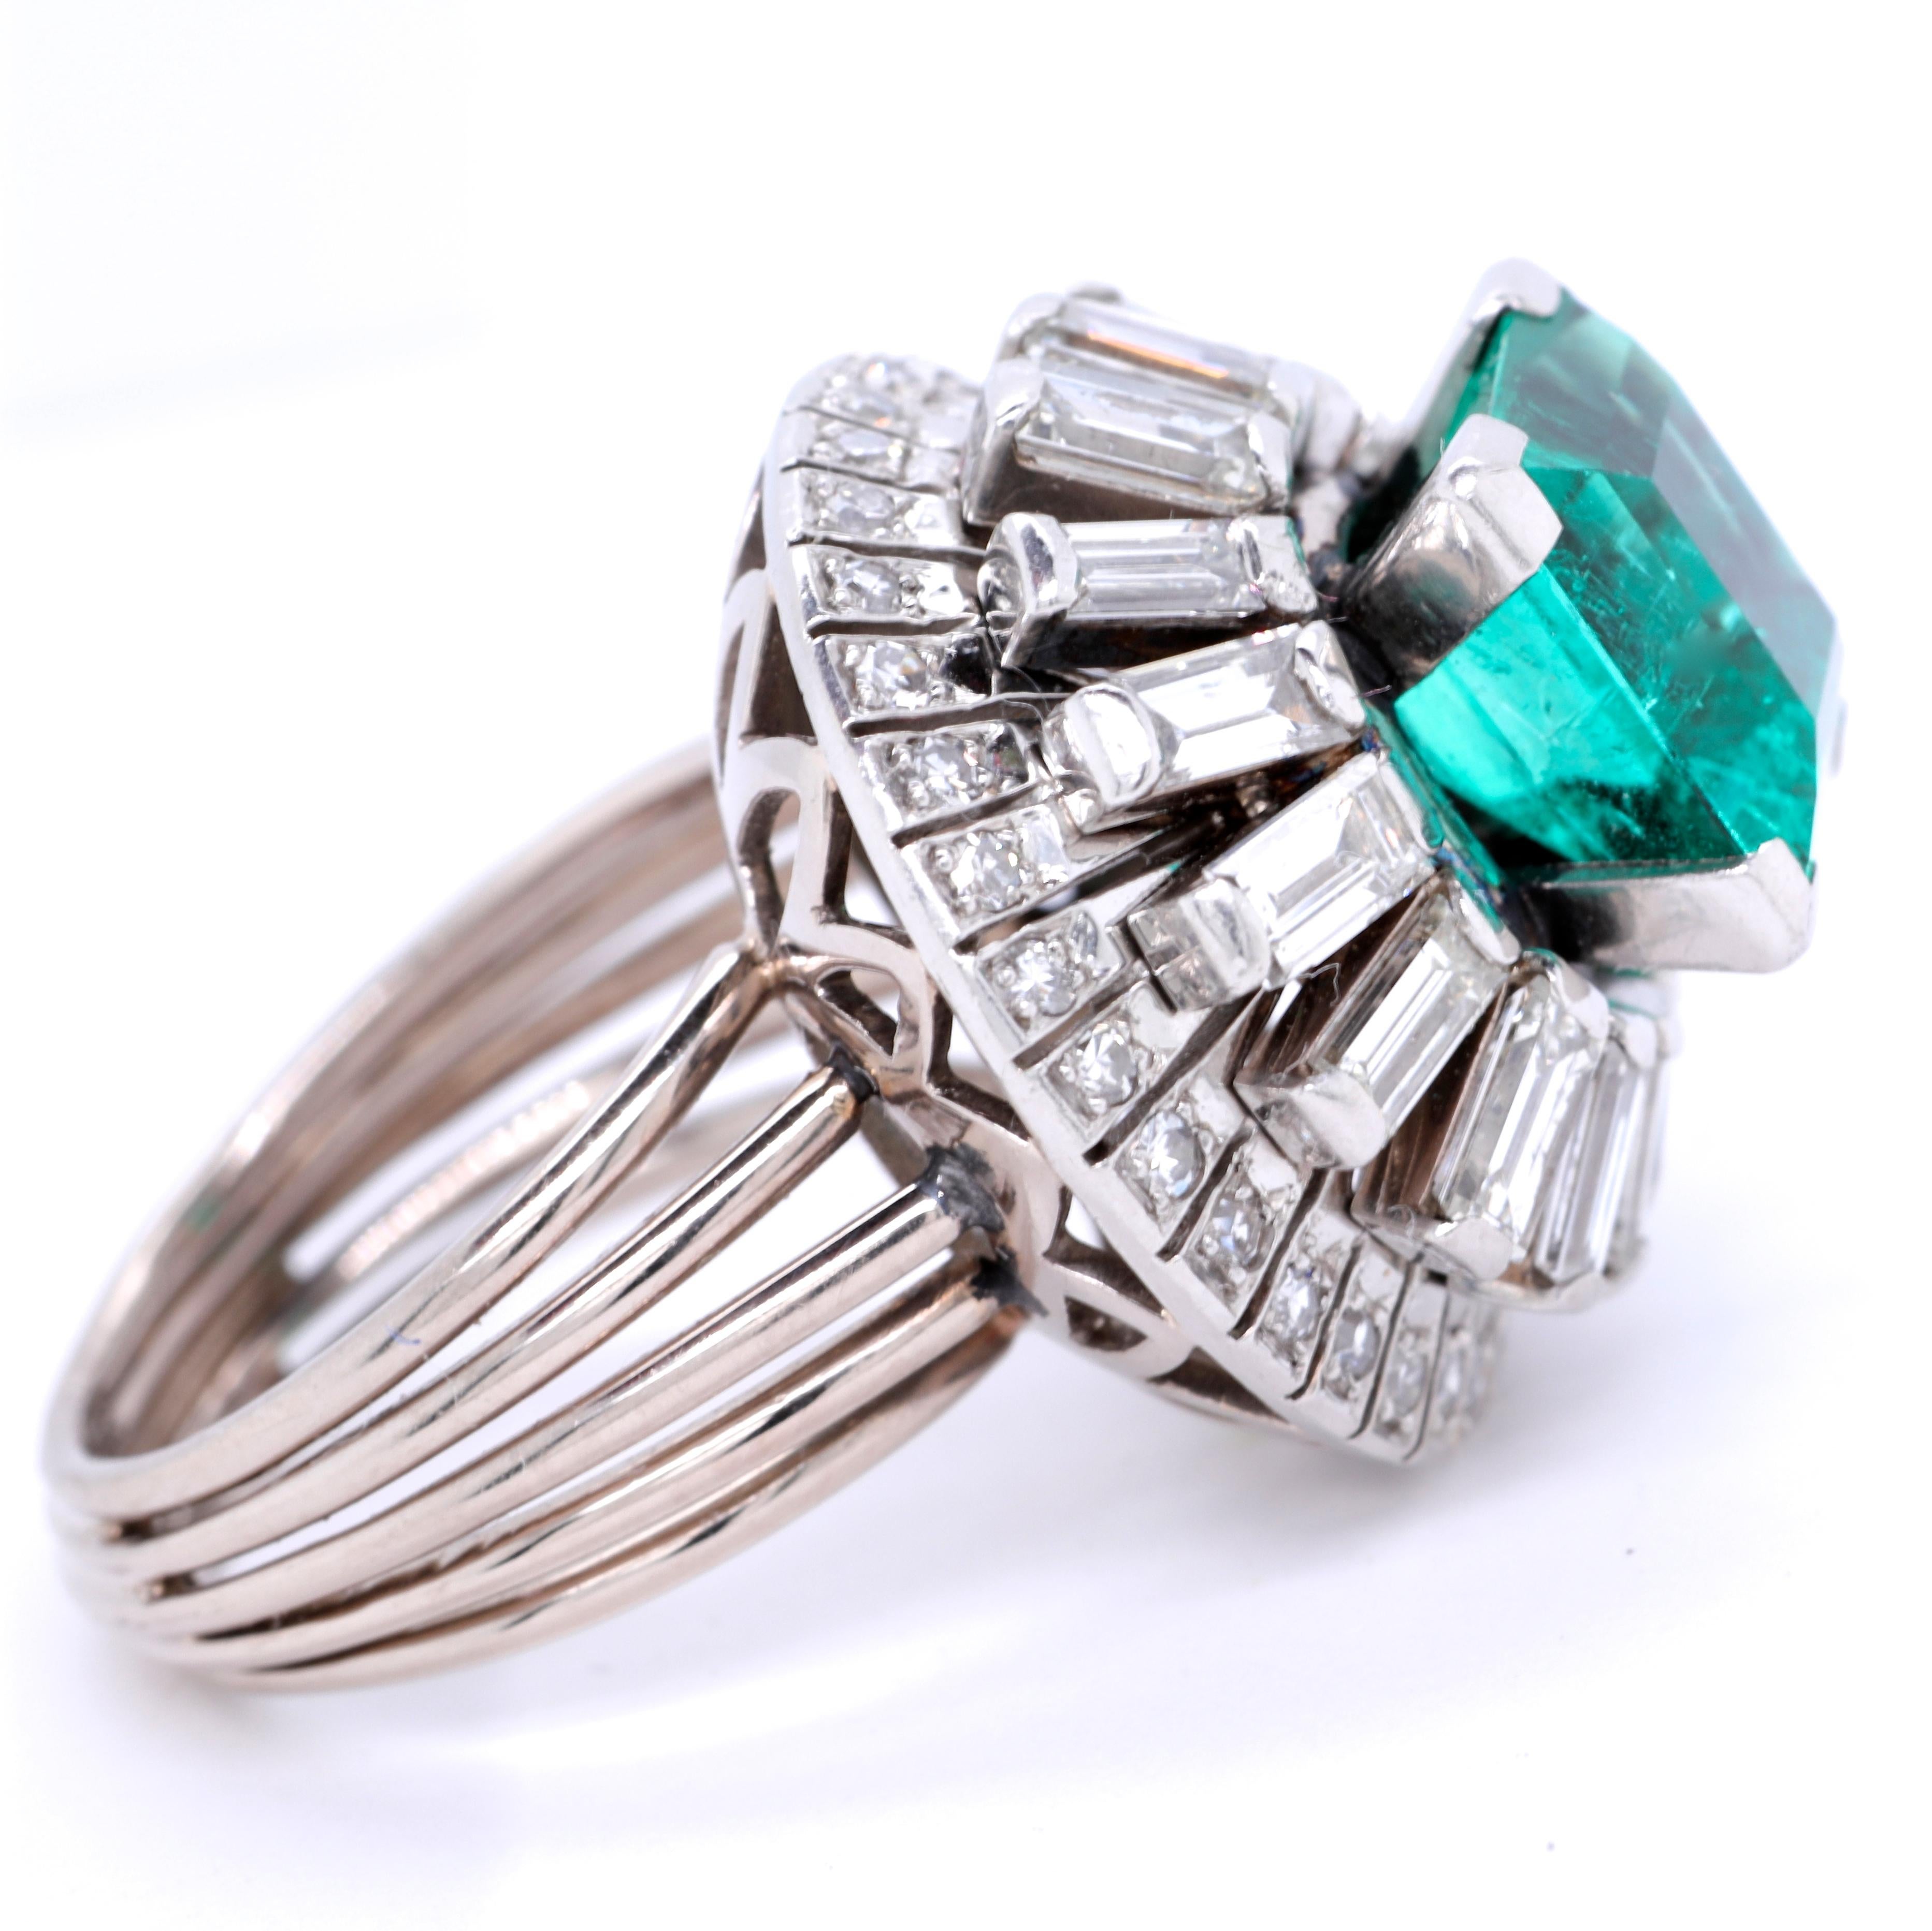 Make a statement as you walk into the room. This striking retro emerald and diamond ring will not let you go unnoticed at any soiree. Radiate your sparkle and confidence.  Henri Poincot Emerald Diamond Platinum Ring. AGL certified Columbian emerald